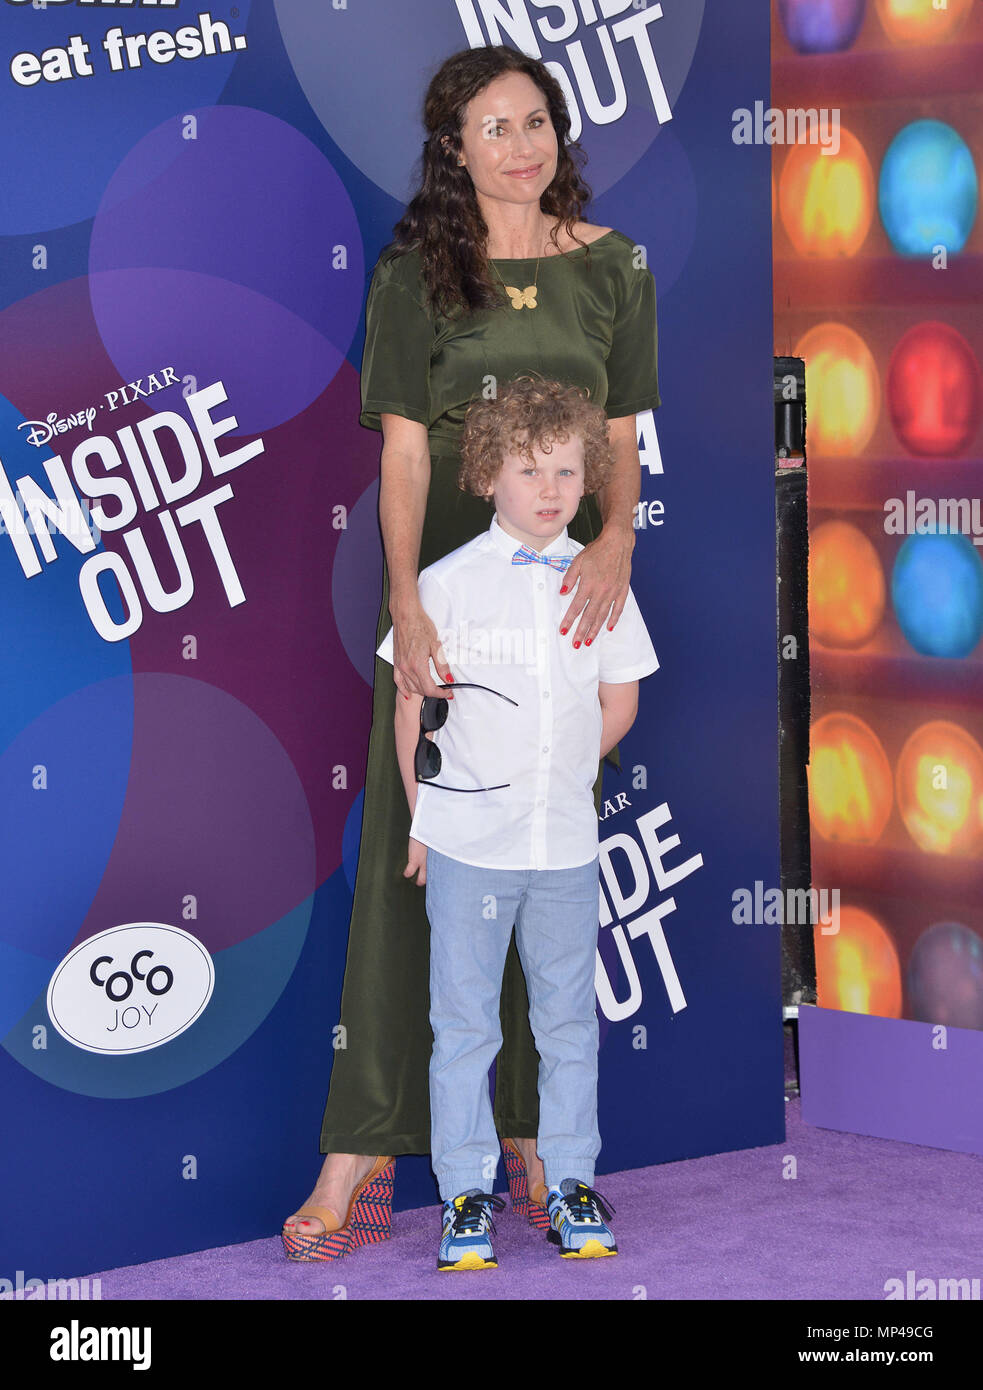 Minnie Driver and son Henry Story Driver 117 at the  Inside Out Premiere at the El Capitan Theatre in Los Angeles. June, 8, 2015.Minnie Driver and son Henry Story Driver 117 ------------- Red Carpet Event, Vertical, USA, Film Industry, Celebrities,  Photography, Bestof, Arts Culture and Entertainment, Topix Celebrities fashion /  Vertical, Best of, Event in Hollywood Life - California,  Red Carpet and backstage, USA, Film Industry, Celebrities,  movie celebrities, TV celebrities, Music celebrities, Photography, Bestof, Arts Culture and Entertainment,  Topix, vertical,  family from from the yea Stock Photo